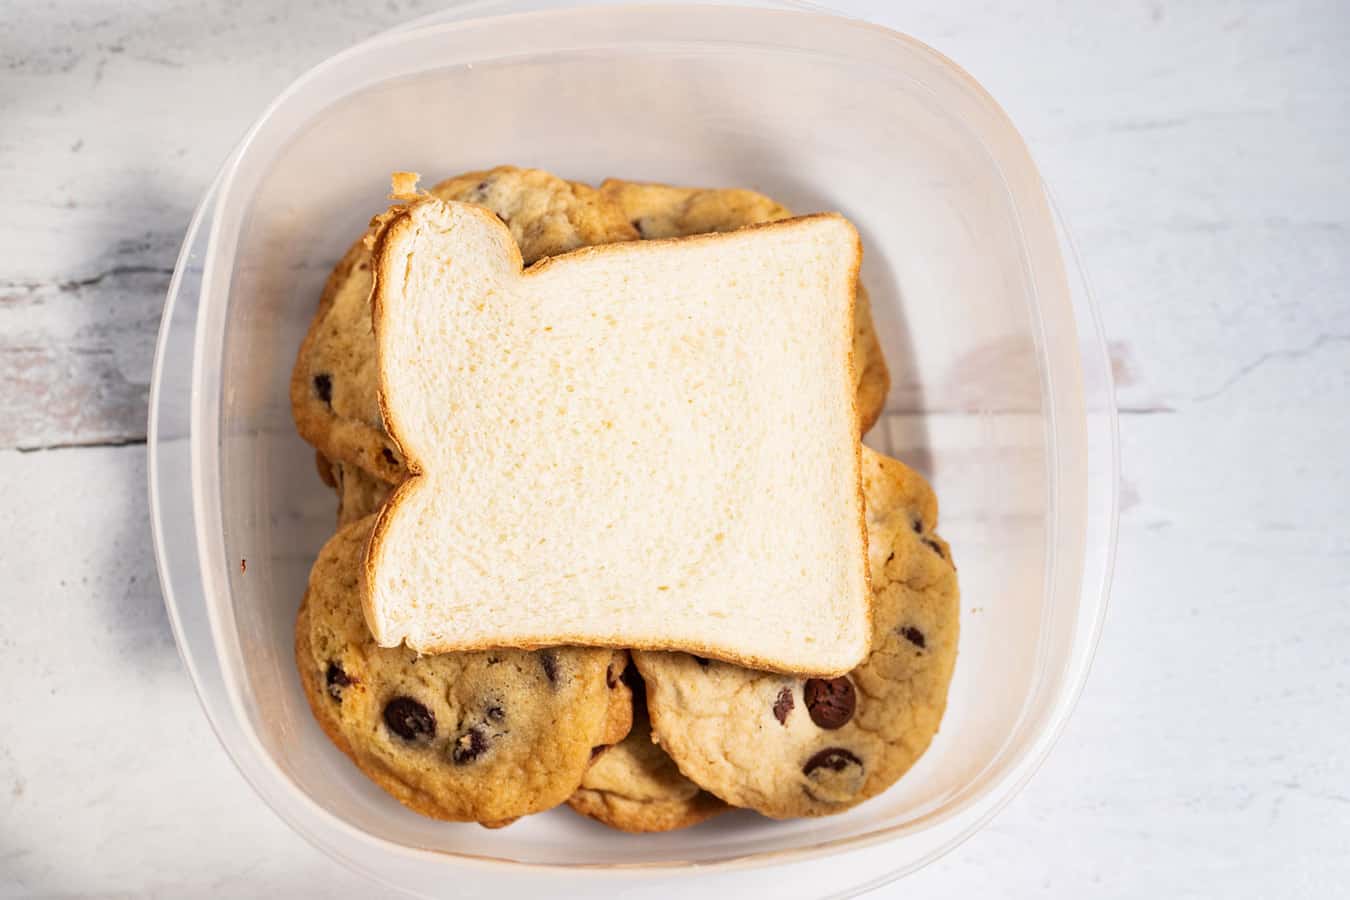 How to store chocolate chip cookies with a slice of white bread.